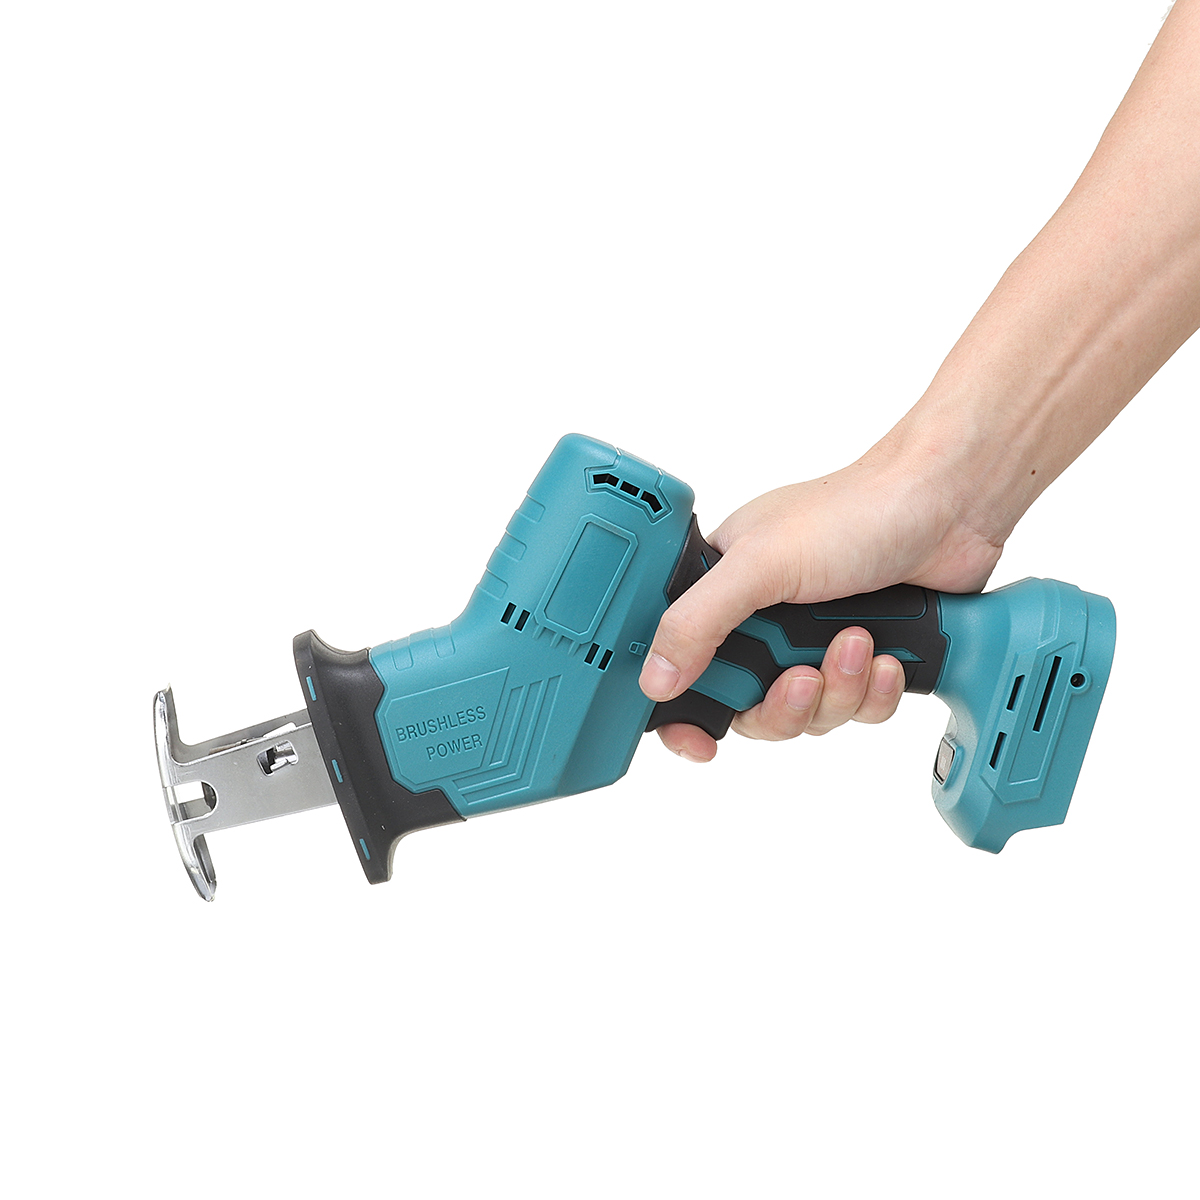 Rechargeable-Reciprocating-Saw-Brushless-Electric-Saw-For-Makita-Battery-Woodworking-Wood-Plastic-Ir-1886209-4